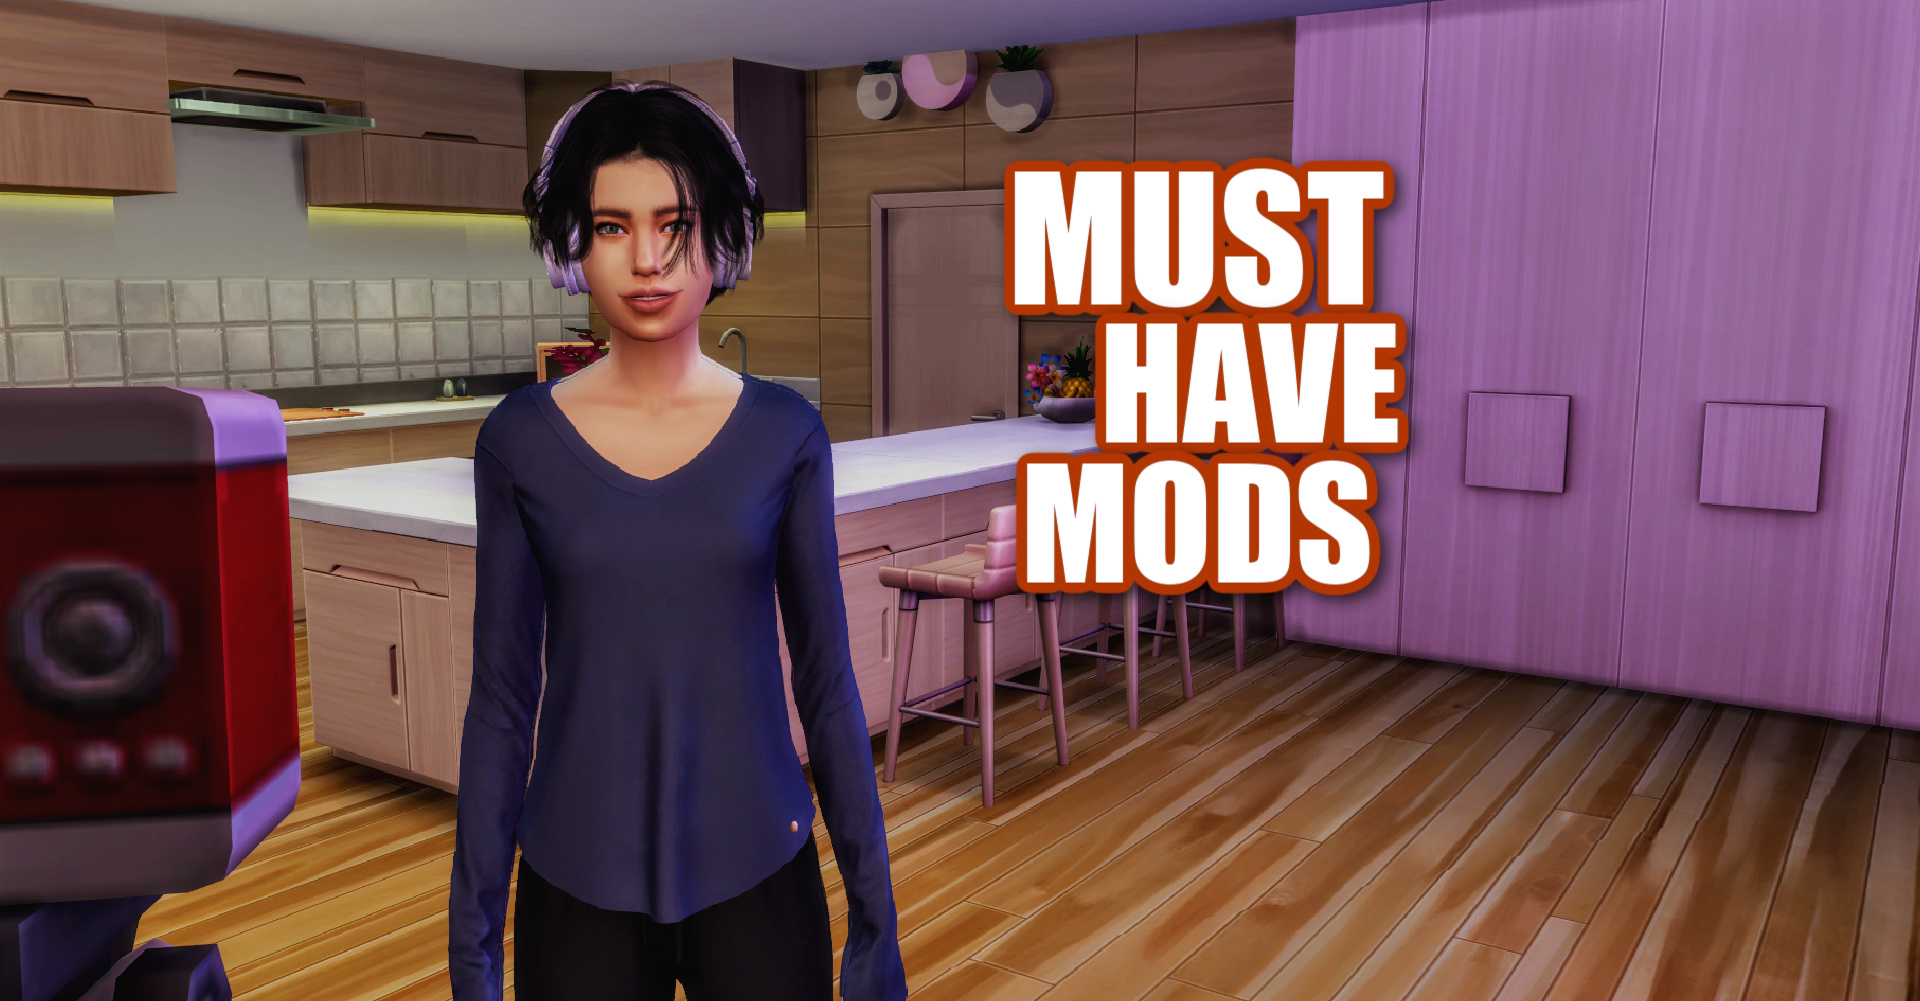 5 MUST HAVE DEATH MODS – THE SIMS 4 – WICKED PIXXEL